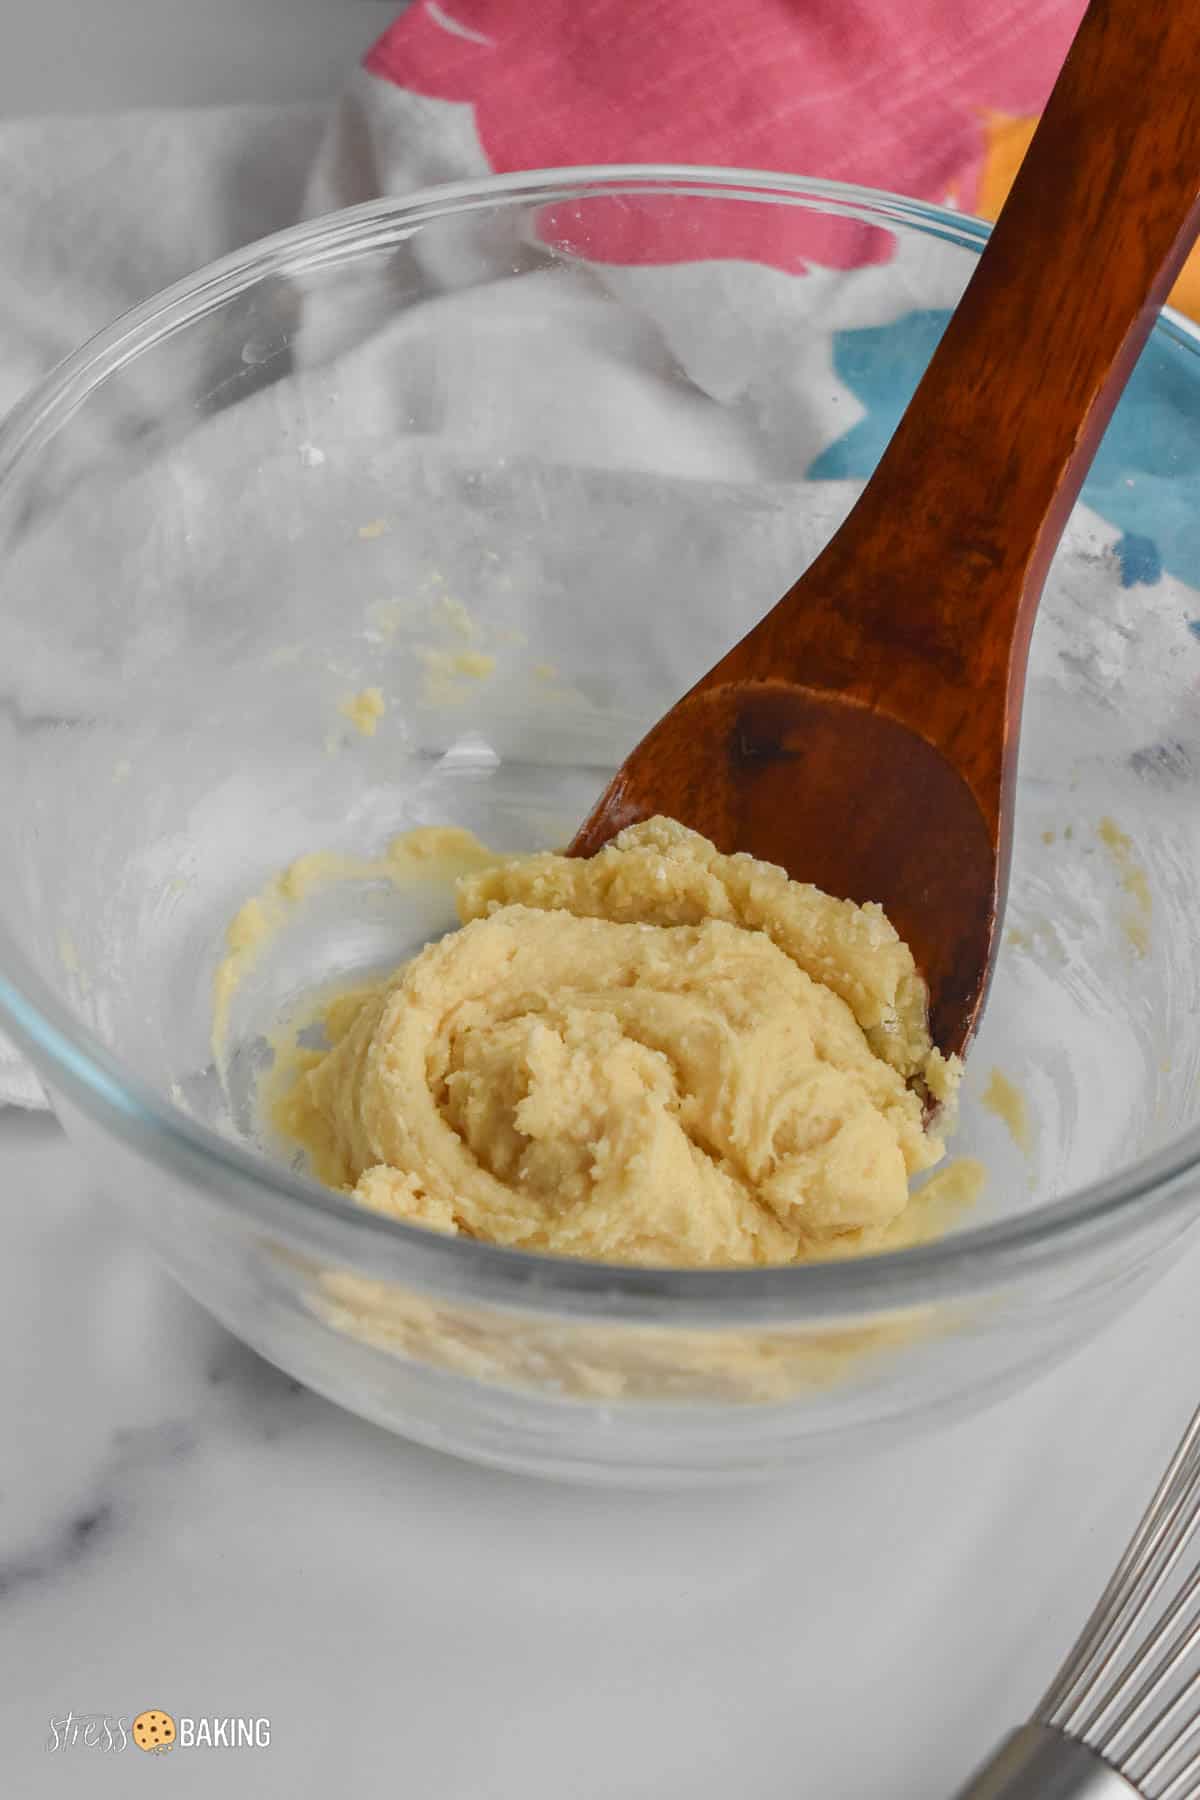 Sugar cookie batter in a glass mixing bowl with a wooden spoon